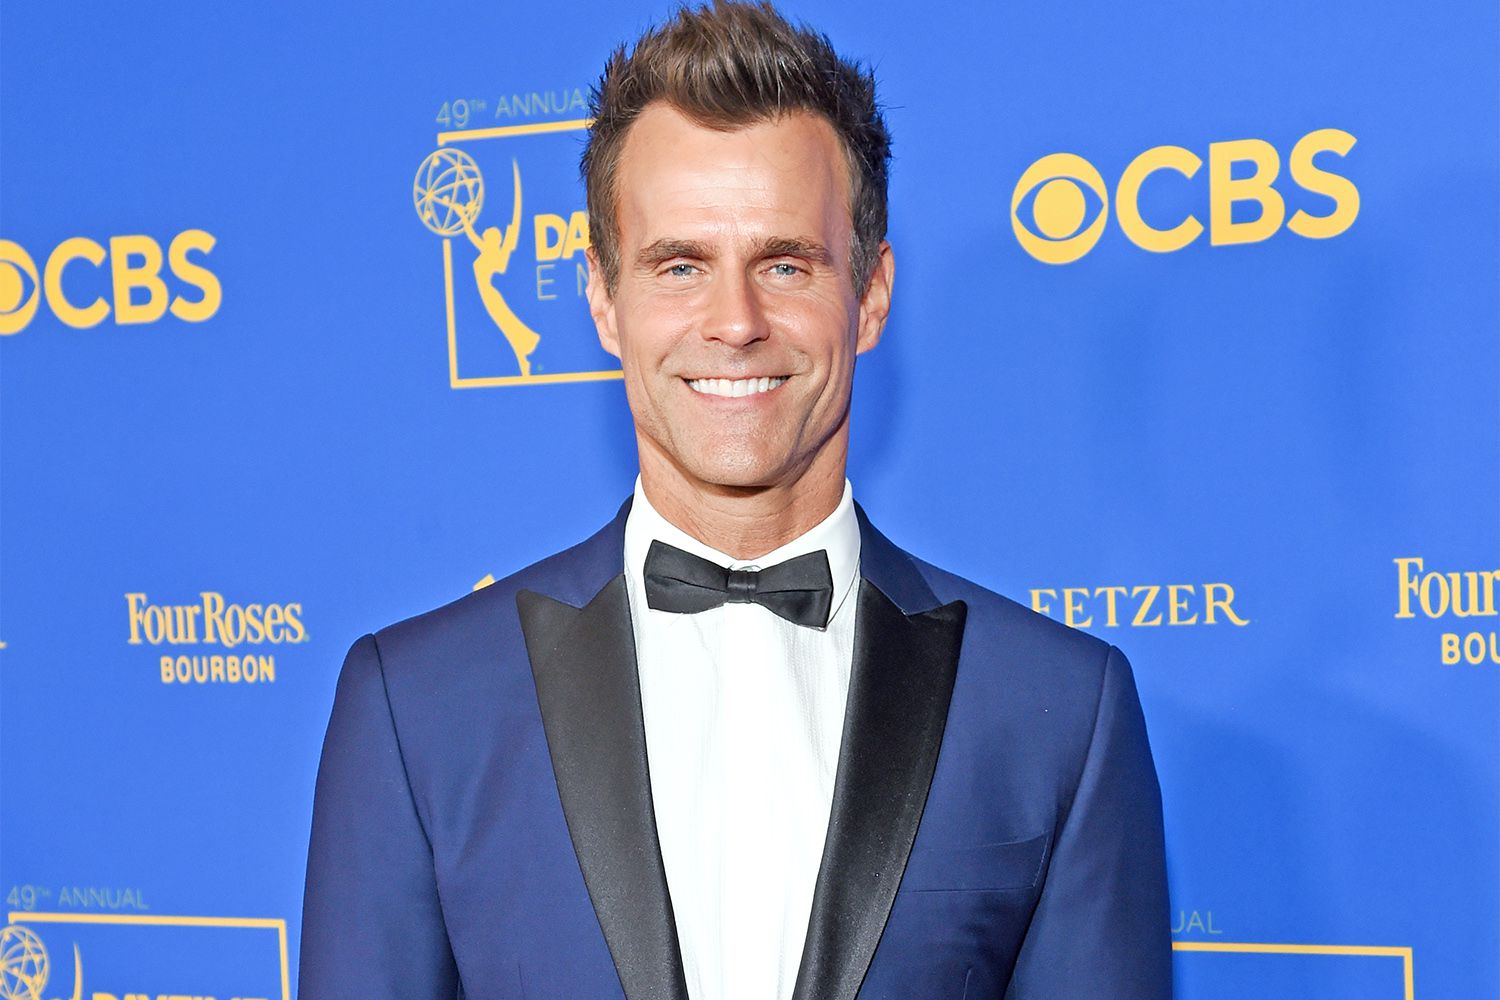 PASADENA, CA - JUNE 24: Cameron Mathison arrives at The 49TH ANNUAL DAYTIME EMMY® AWARDS, broadcasting LIVE Friday, June 24 (9:00-11:00 PM, ET/delayed PT) on the CBS Television Network, and available to stream live and on demand on Paramount+*. This year marks the 16th time CBS has broadcast the Daytime Emmy Awards, more than any other network. The last time they aired on the Network was 2021. (Photo by Stewart Cook/CBS via Getty Images)